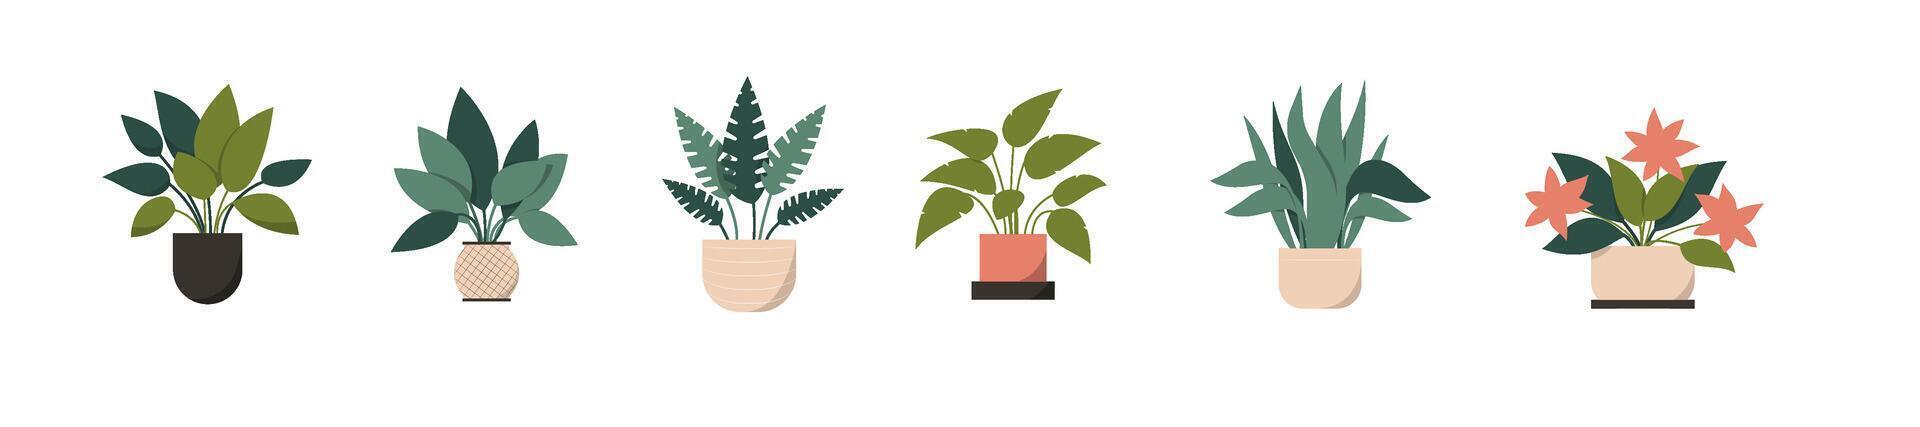 Collection set of houseplants in clay pots for indoor decoration, home, office hand drawn flat illustration vector